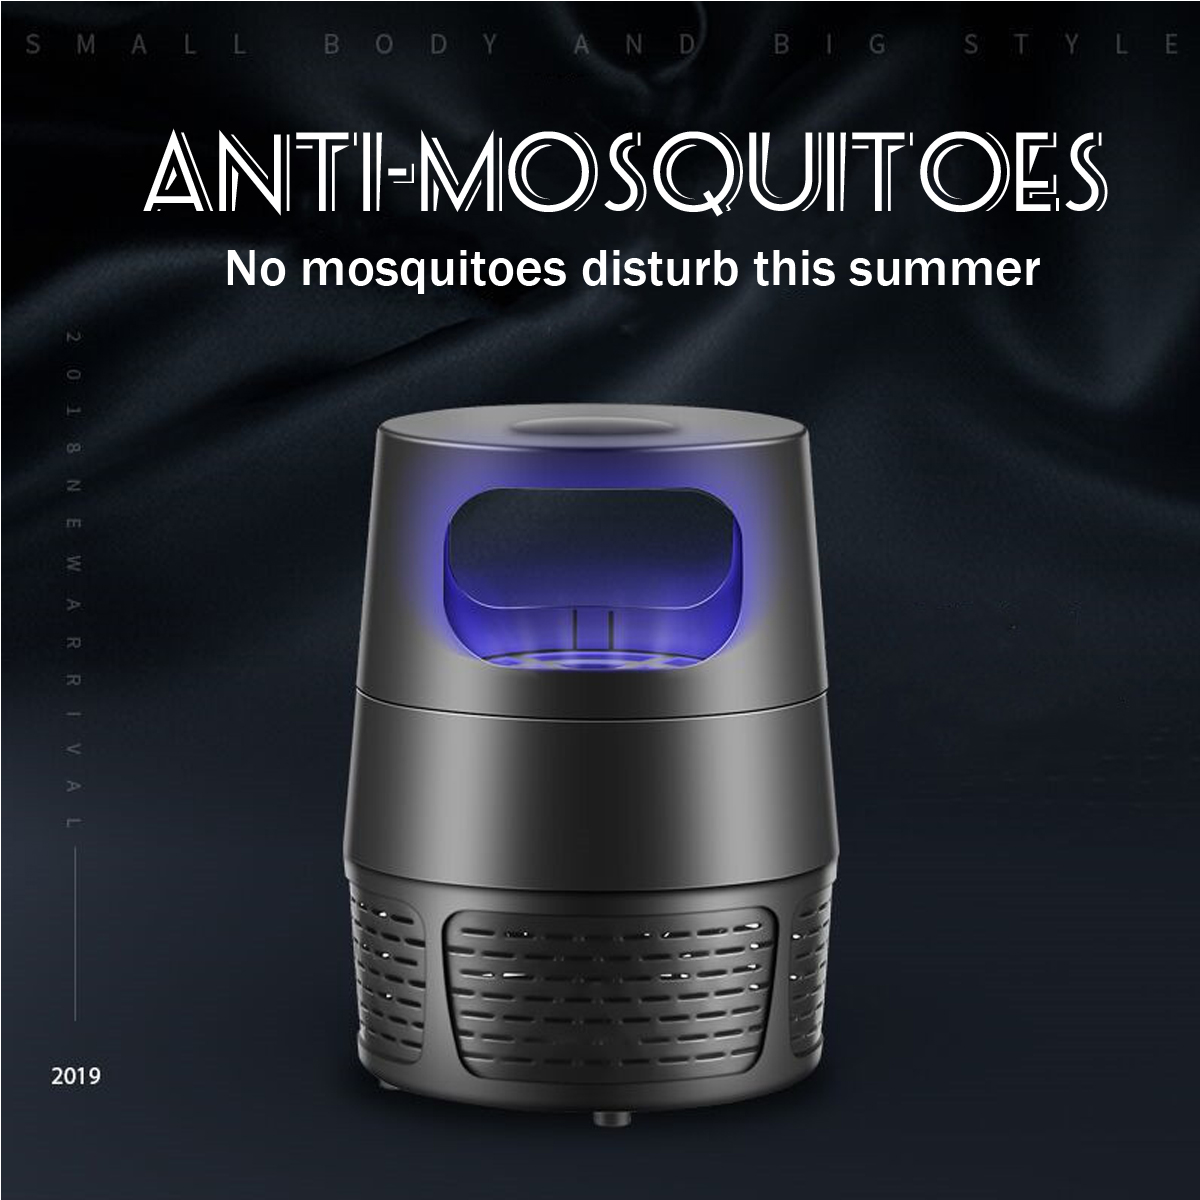 5V-USB-LED-Mosquito-Killer-Lamp-Insect-Fly-Bug-Zapper-Trap-Pest-Control-UV-Light-Mosquito-Dispeller-1445790-4